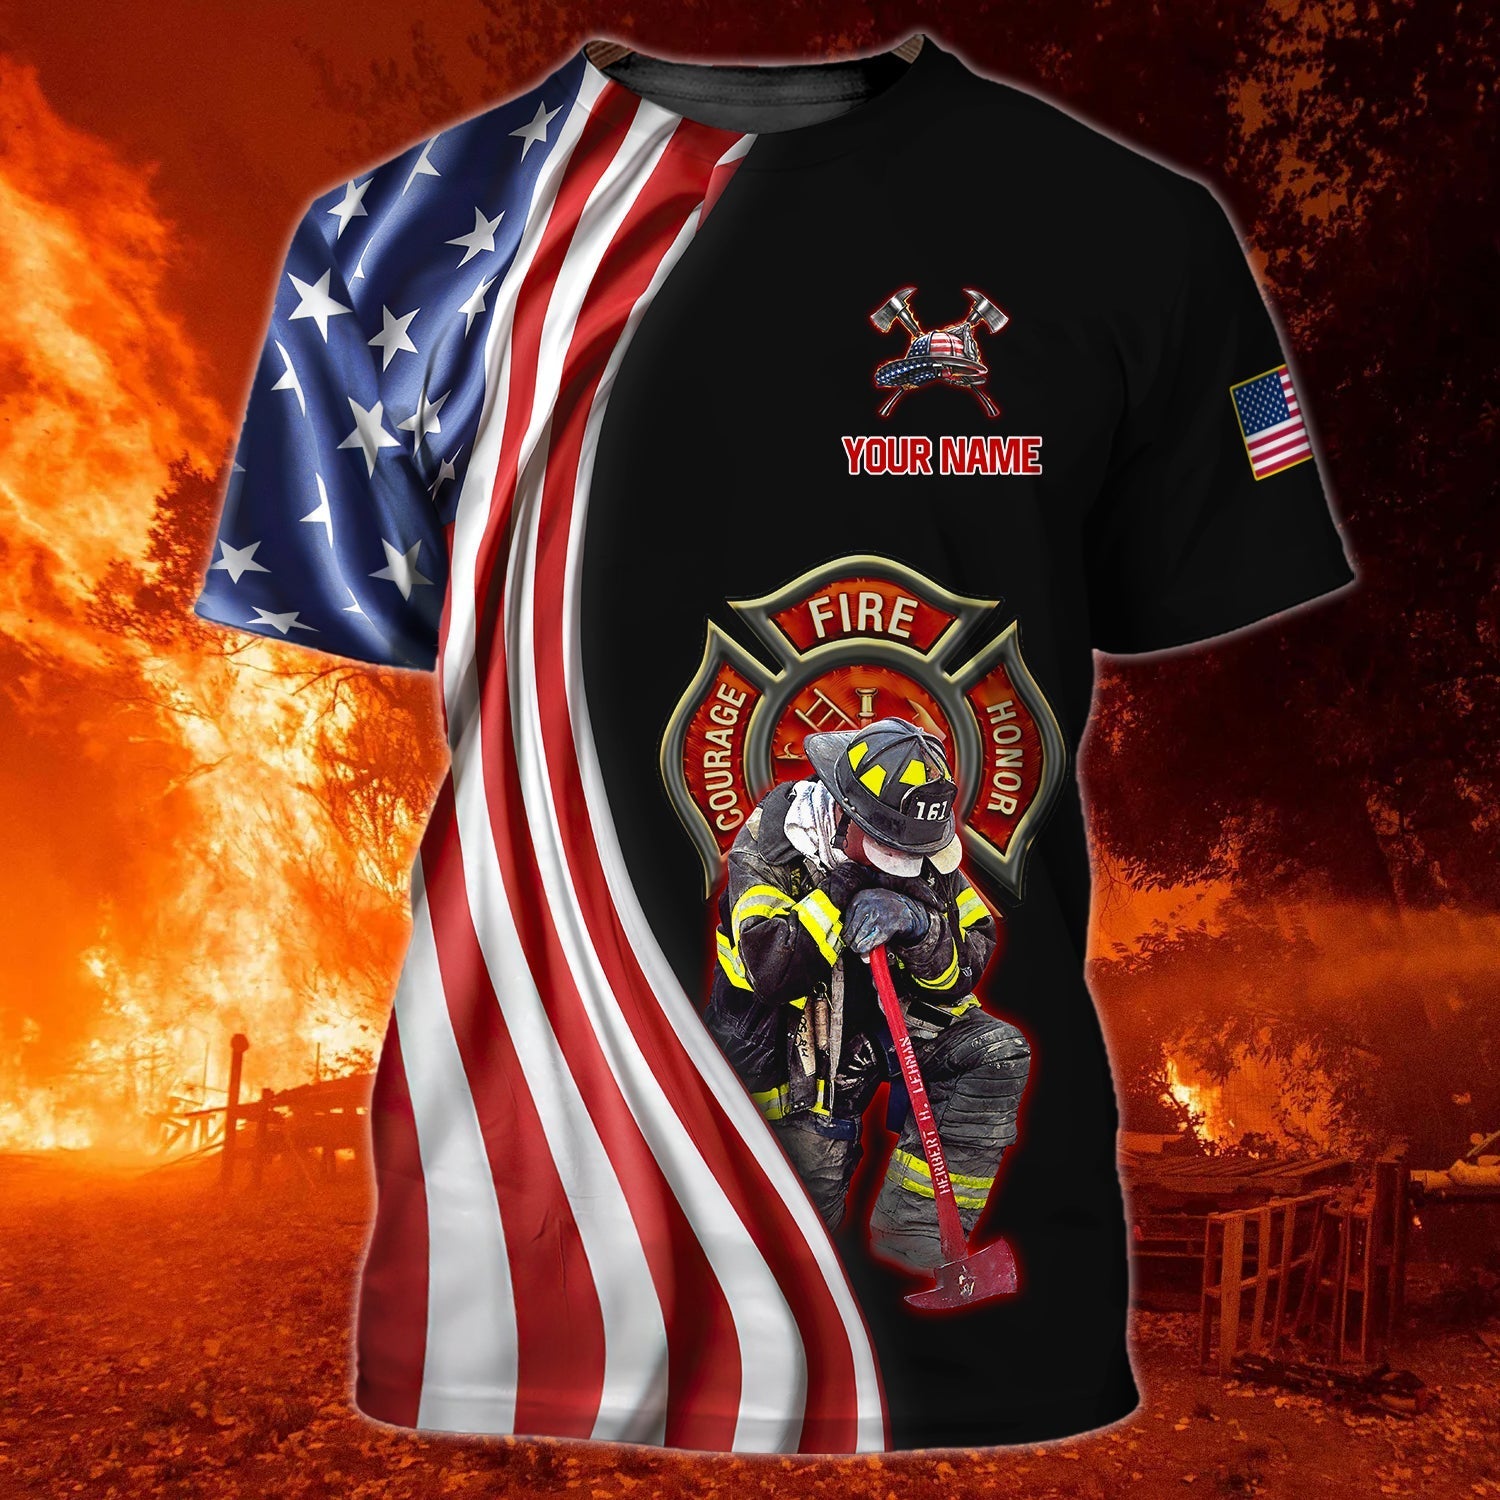 Personalized Firefighter Job Shirts Full Printing/ Proud To Have Save American Firefighter Mand T Shirts